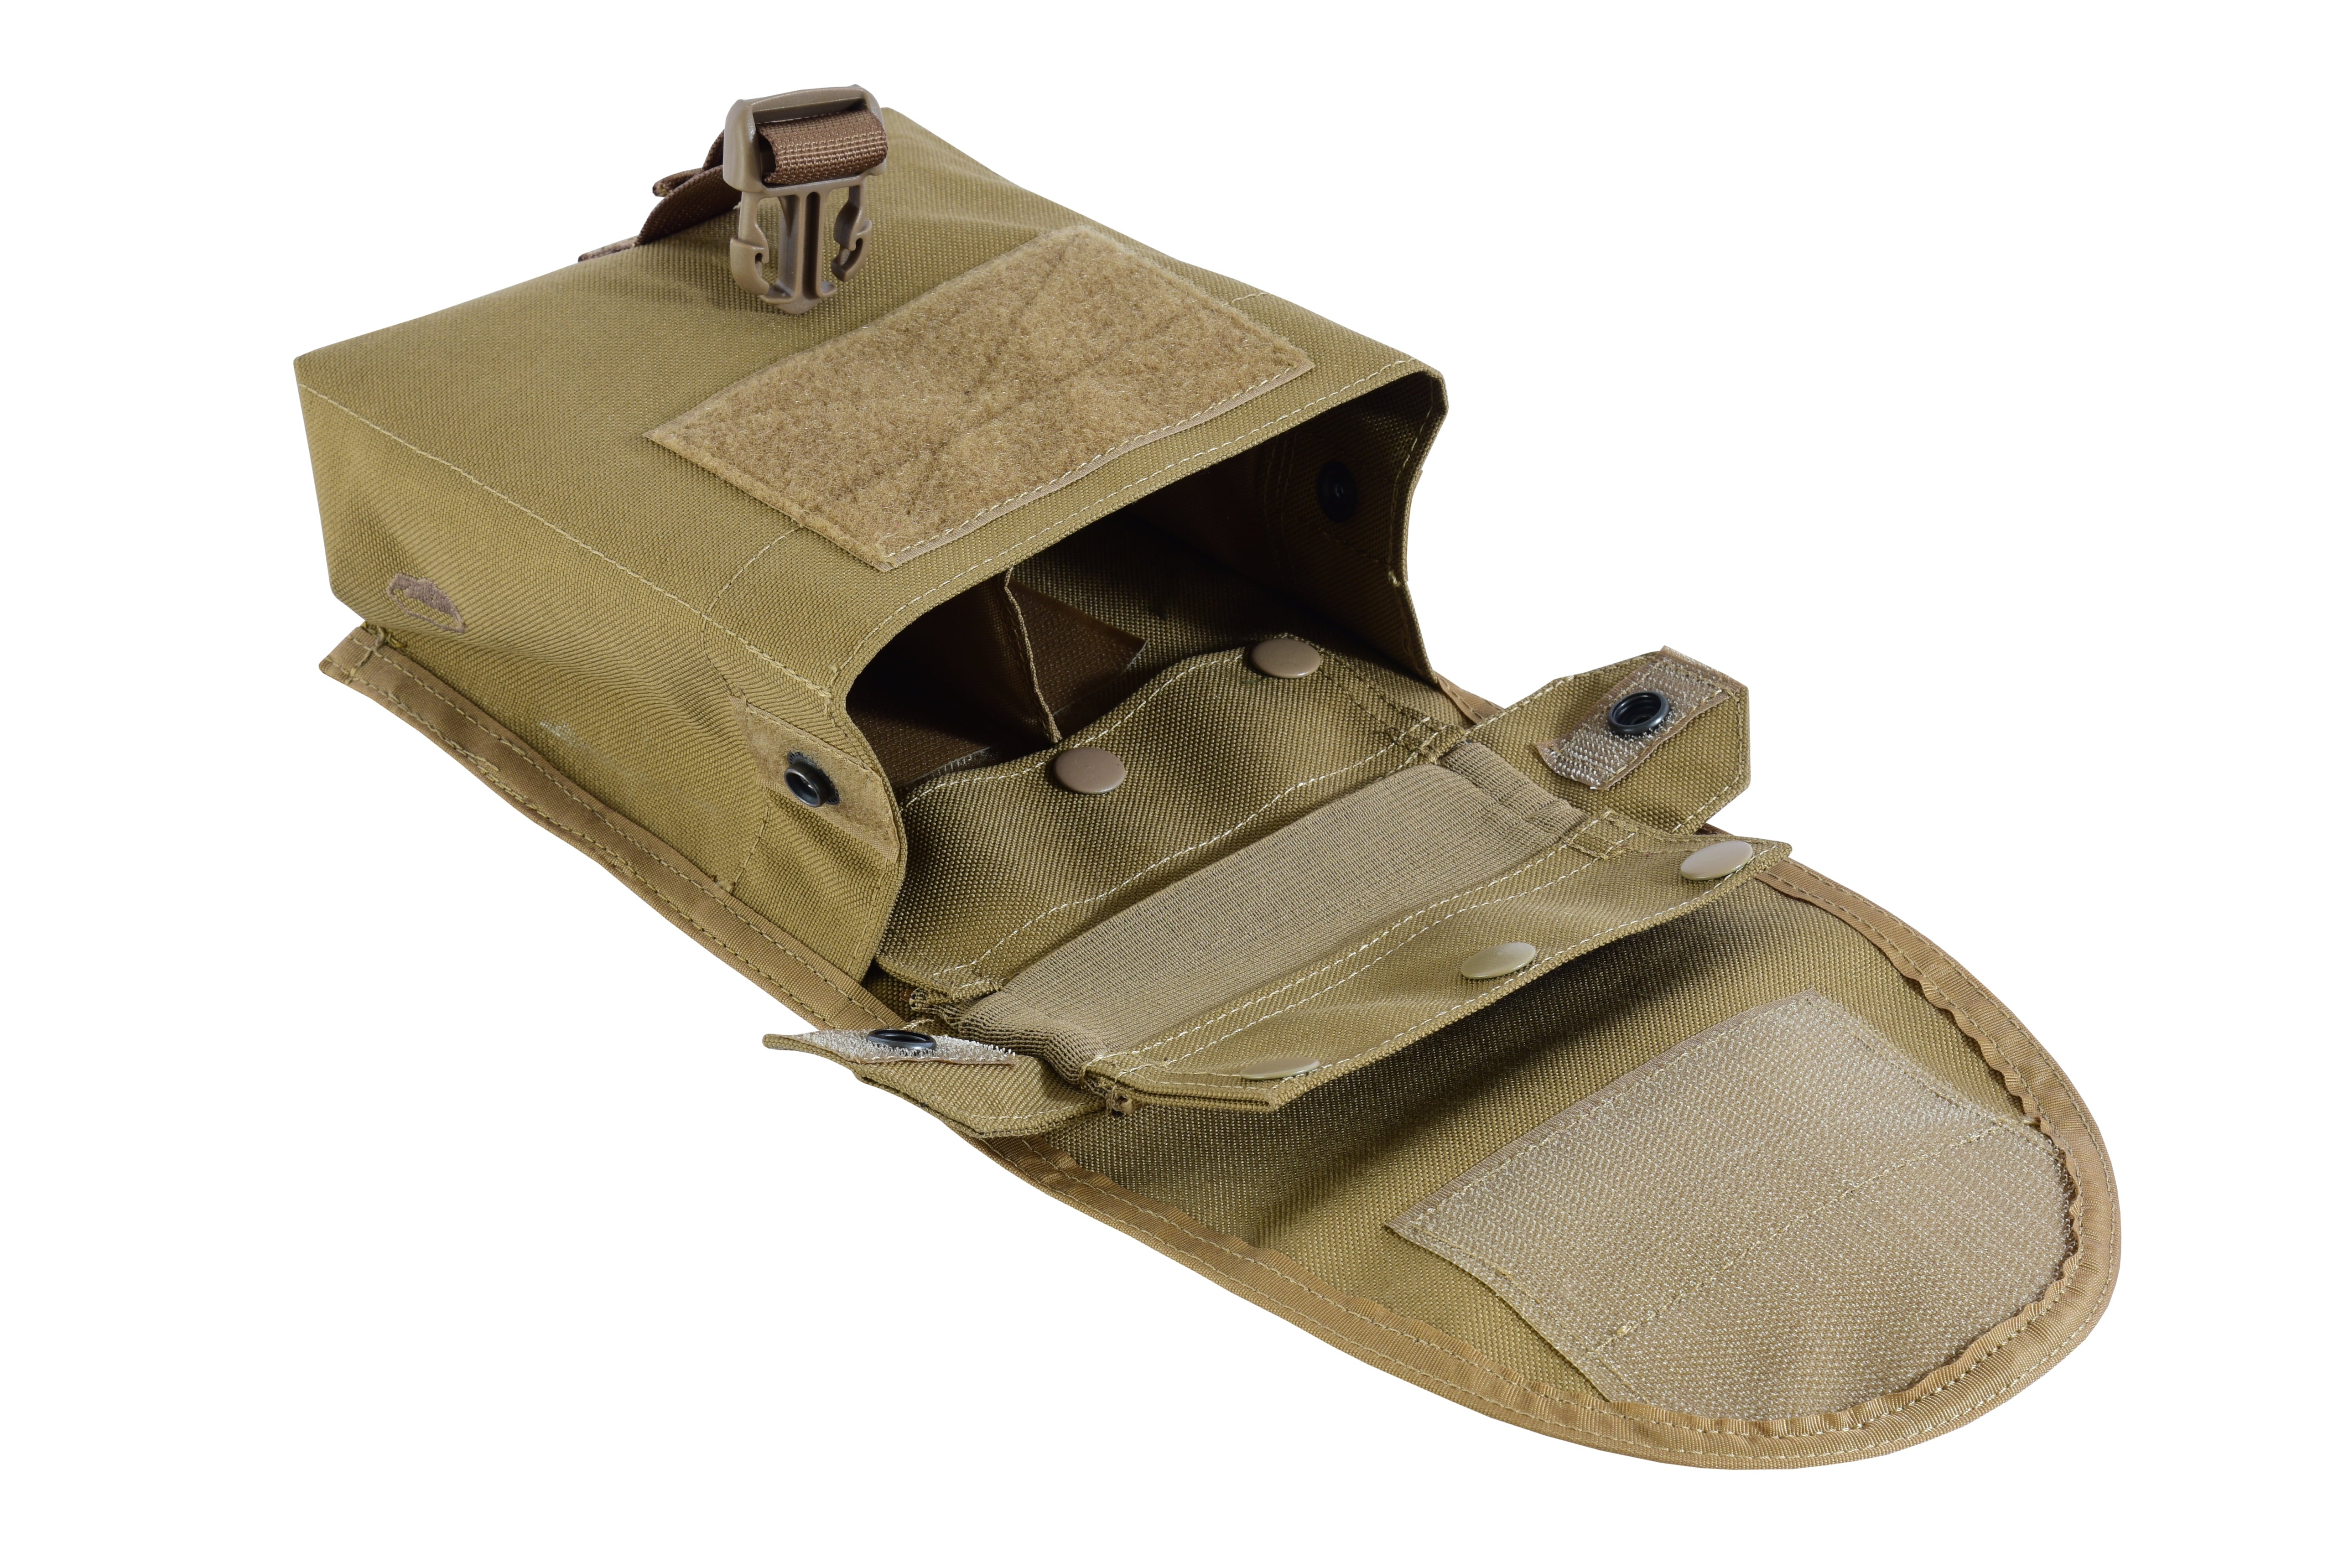 Shadow Strategic Camouflage LMG / SAW Pouch Color Tan inside view.